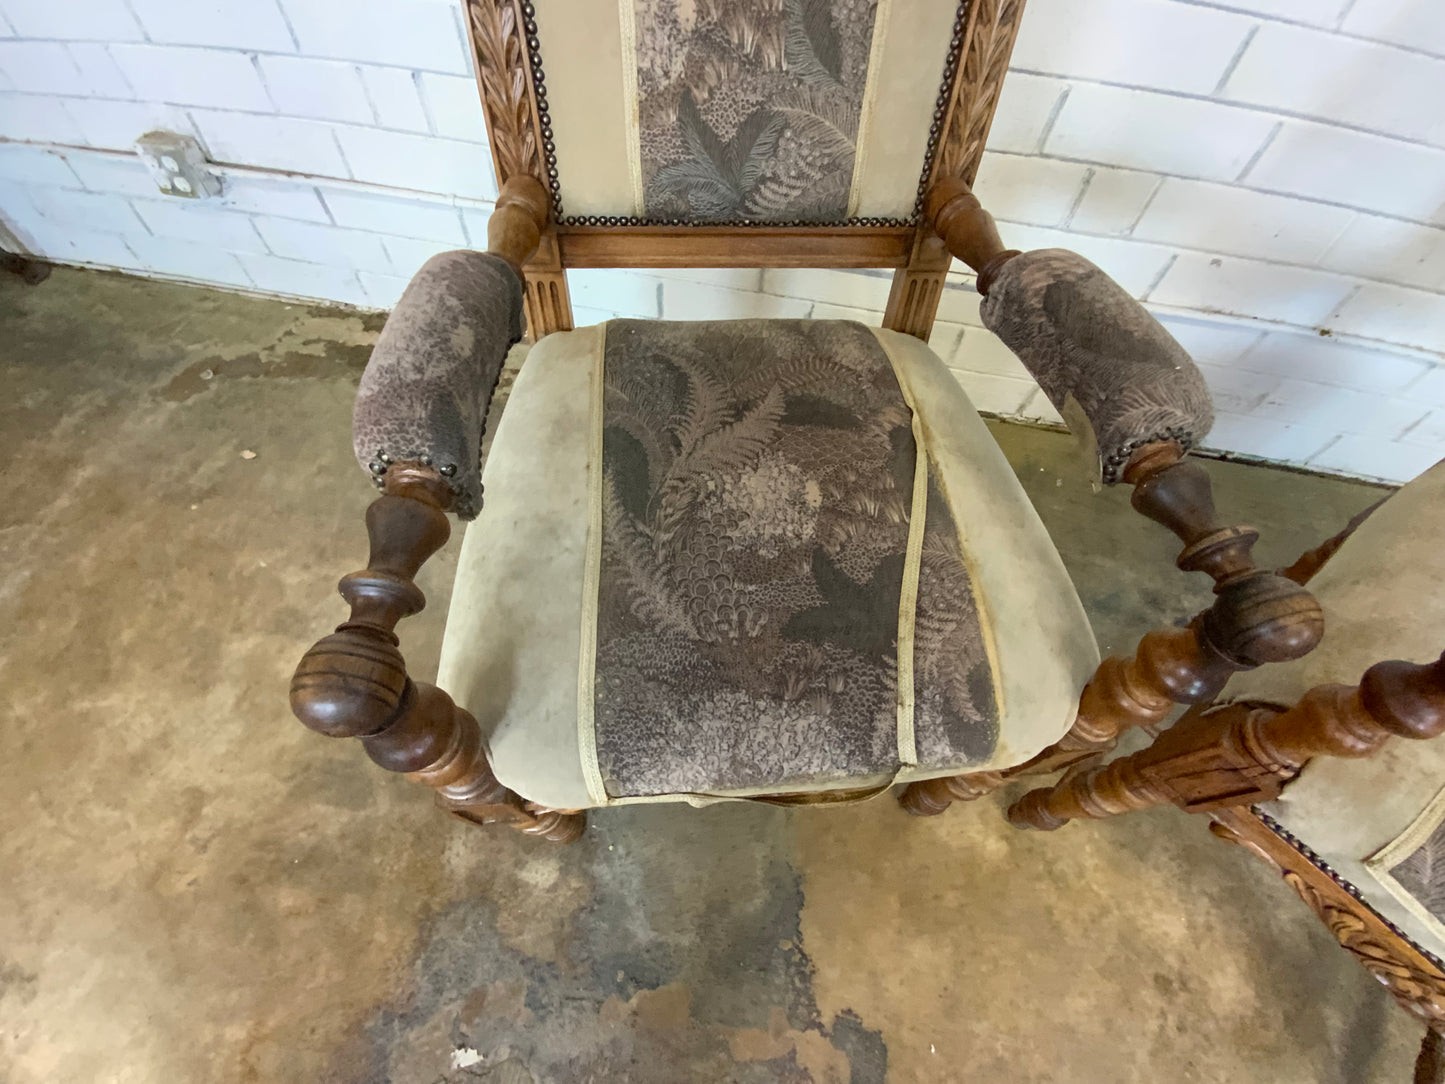 Pair of Wood Framed Chairs